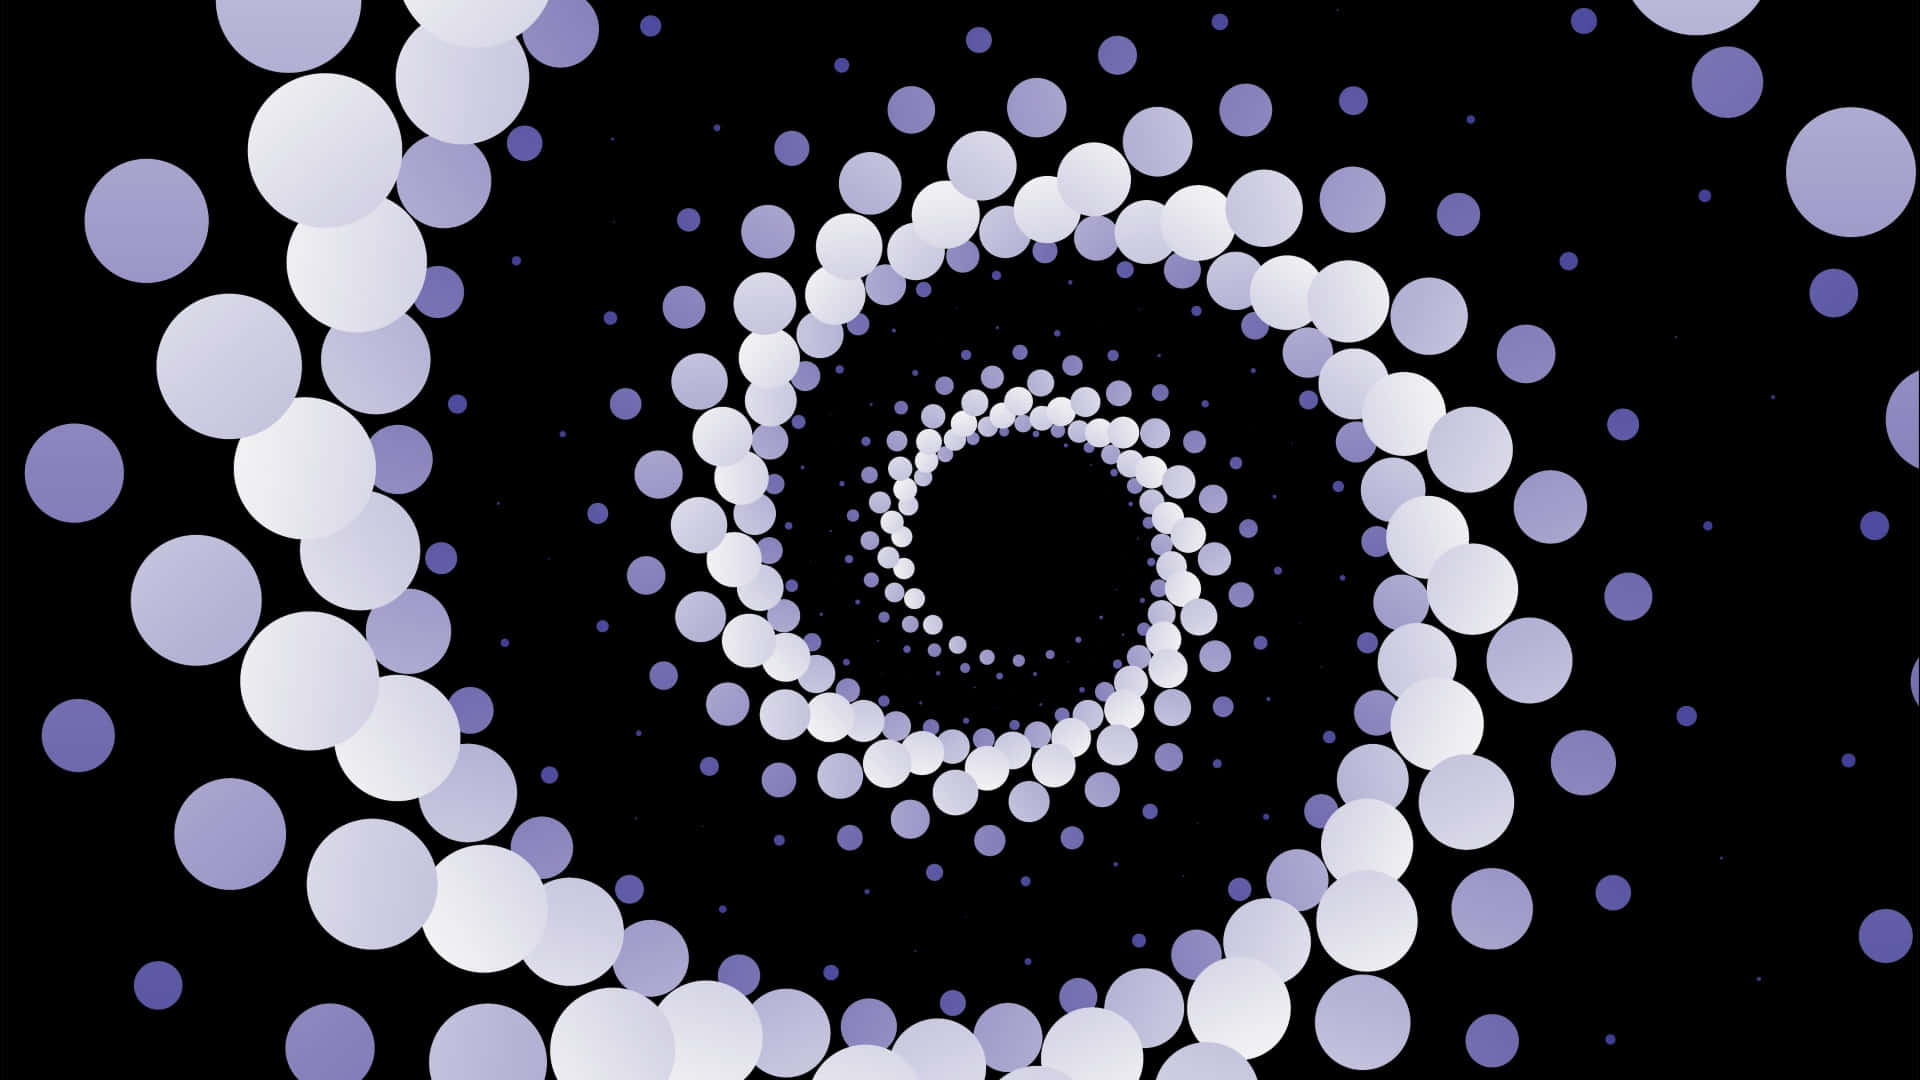 A Spiral Of Dots On A Black Background